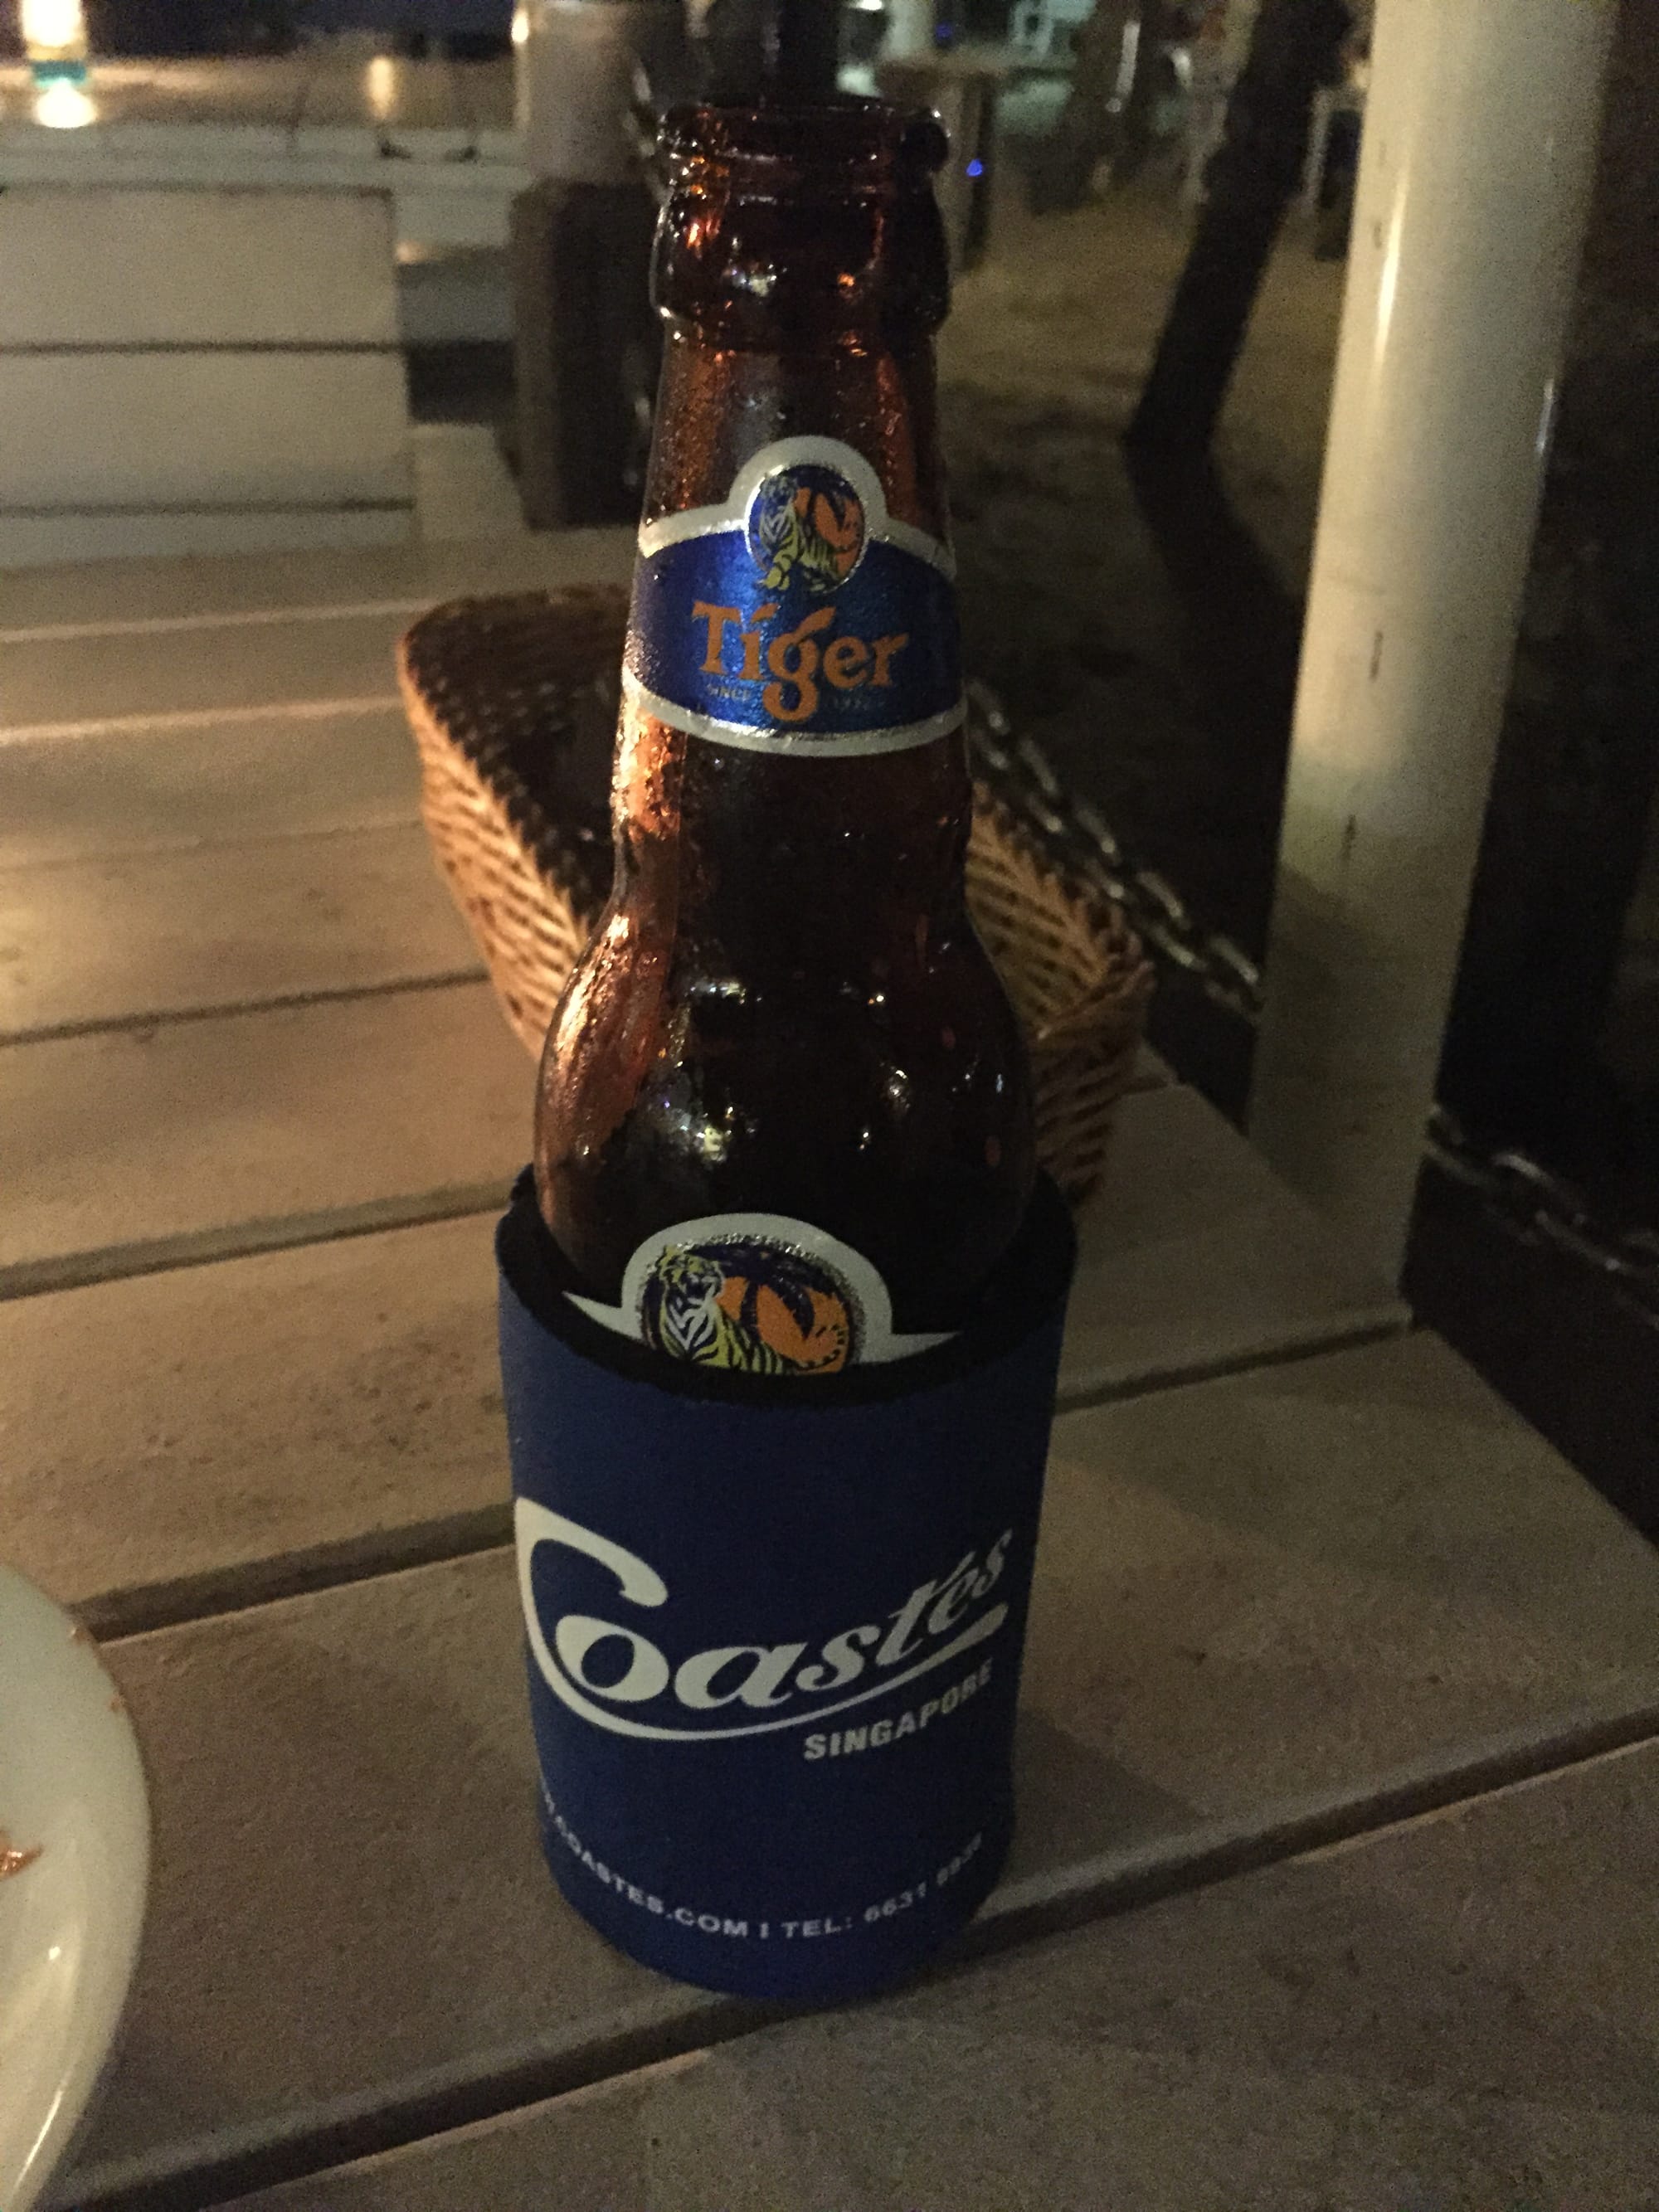 Photo by Author — and my beer — Coastes, Siloso Beach, Singapore